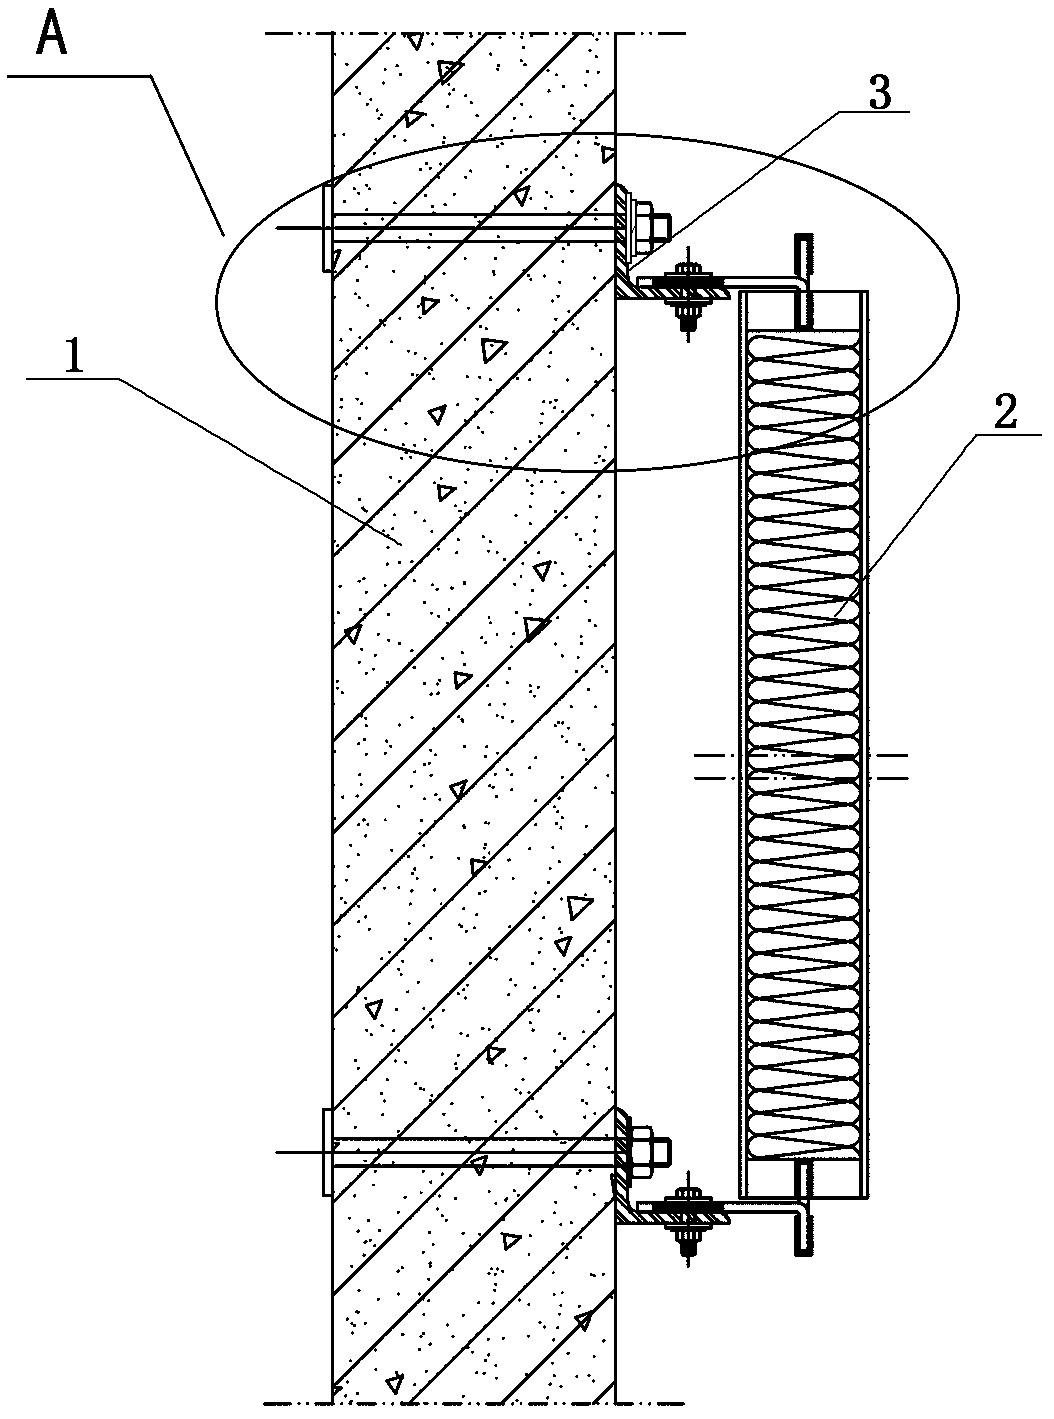 A combination anchoring system and construction method of point-hanging thermal insulation decorative panels on light exterior walls